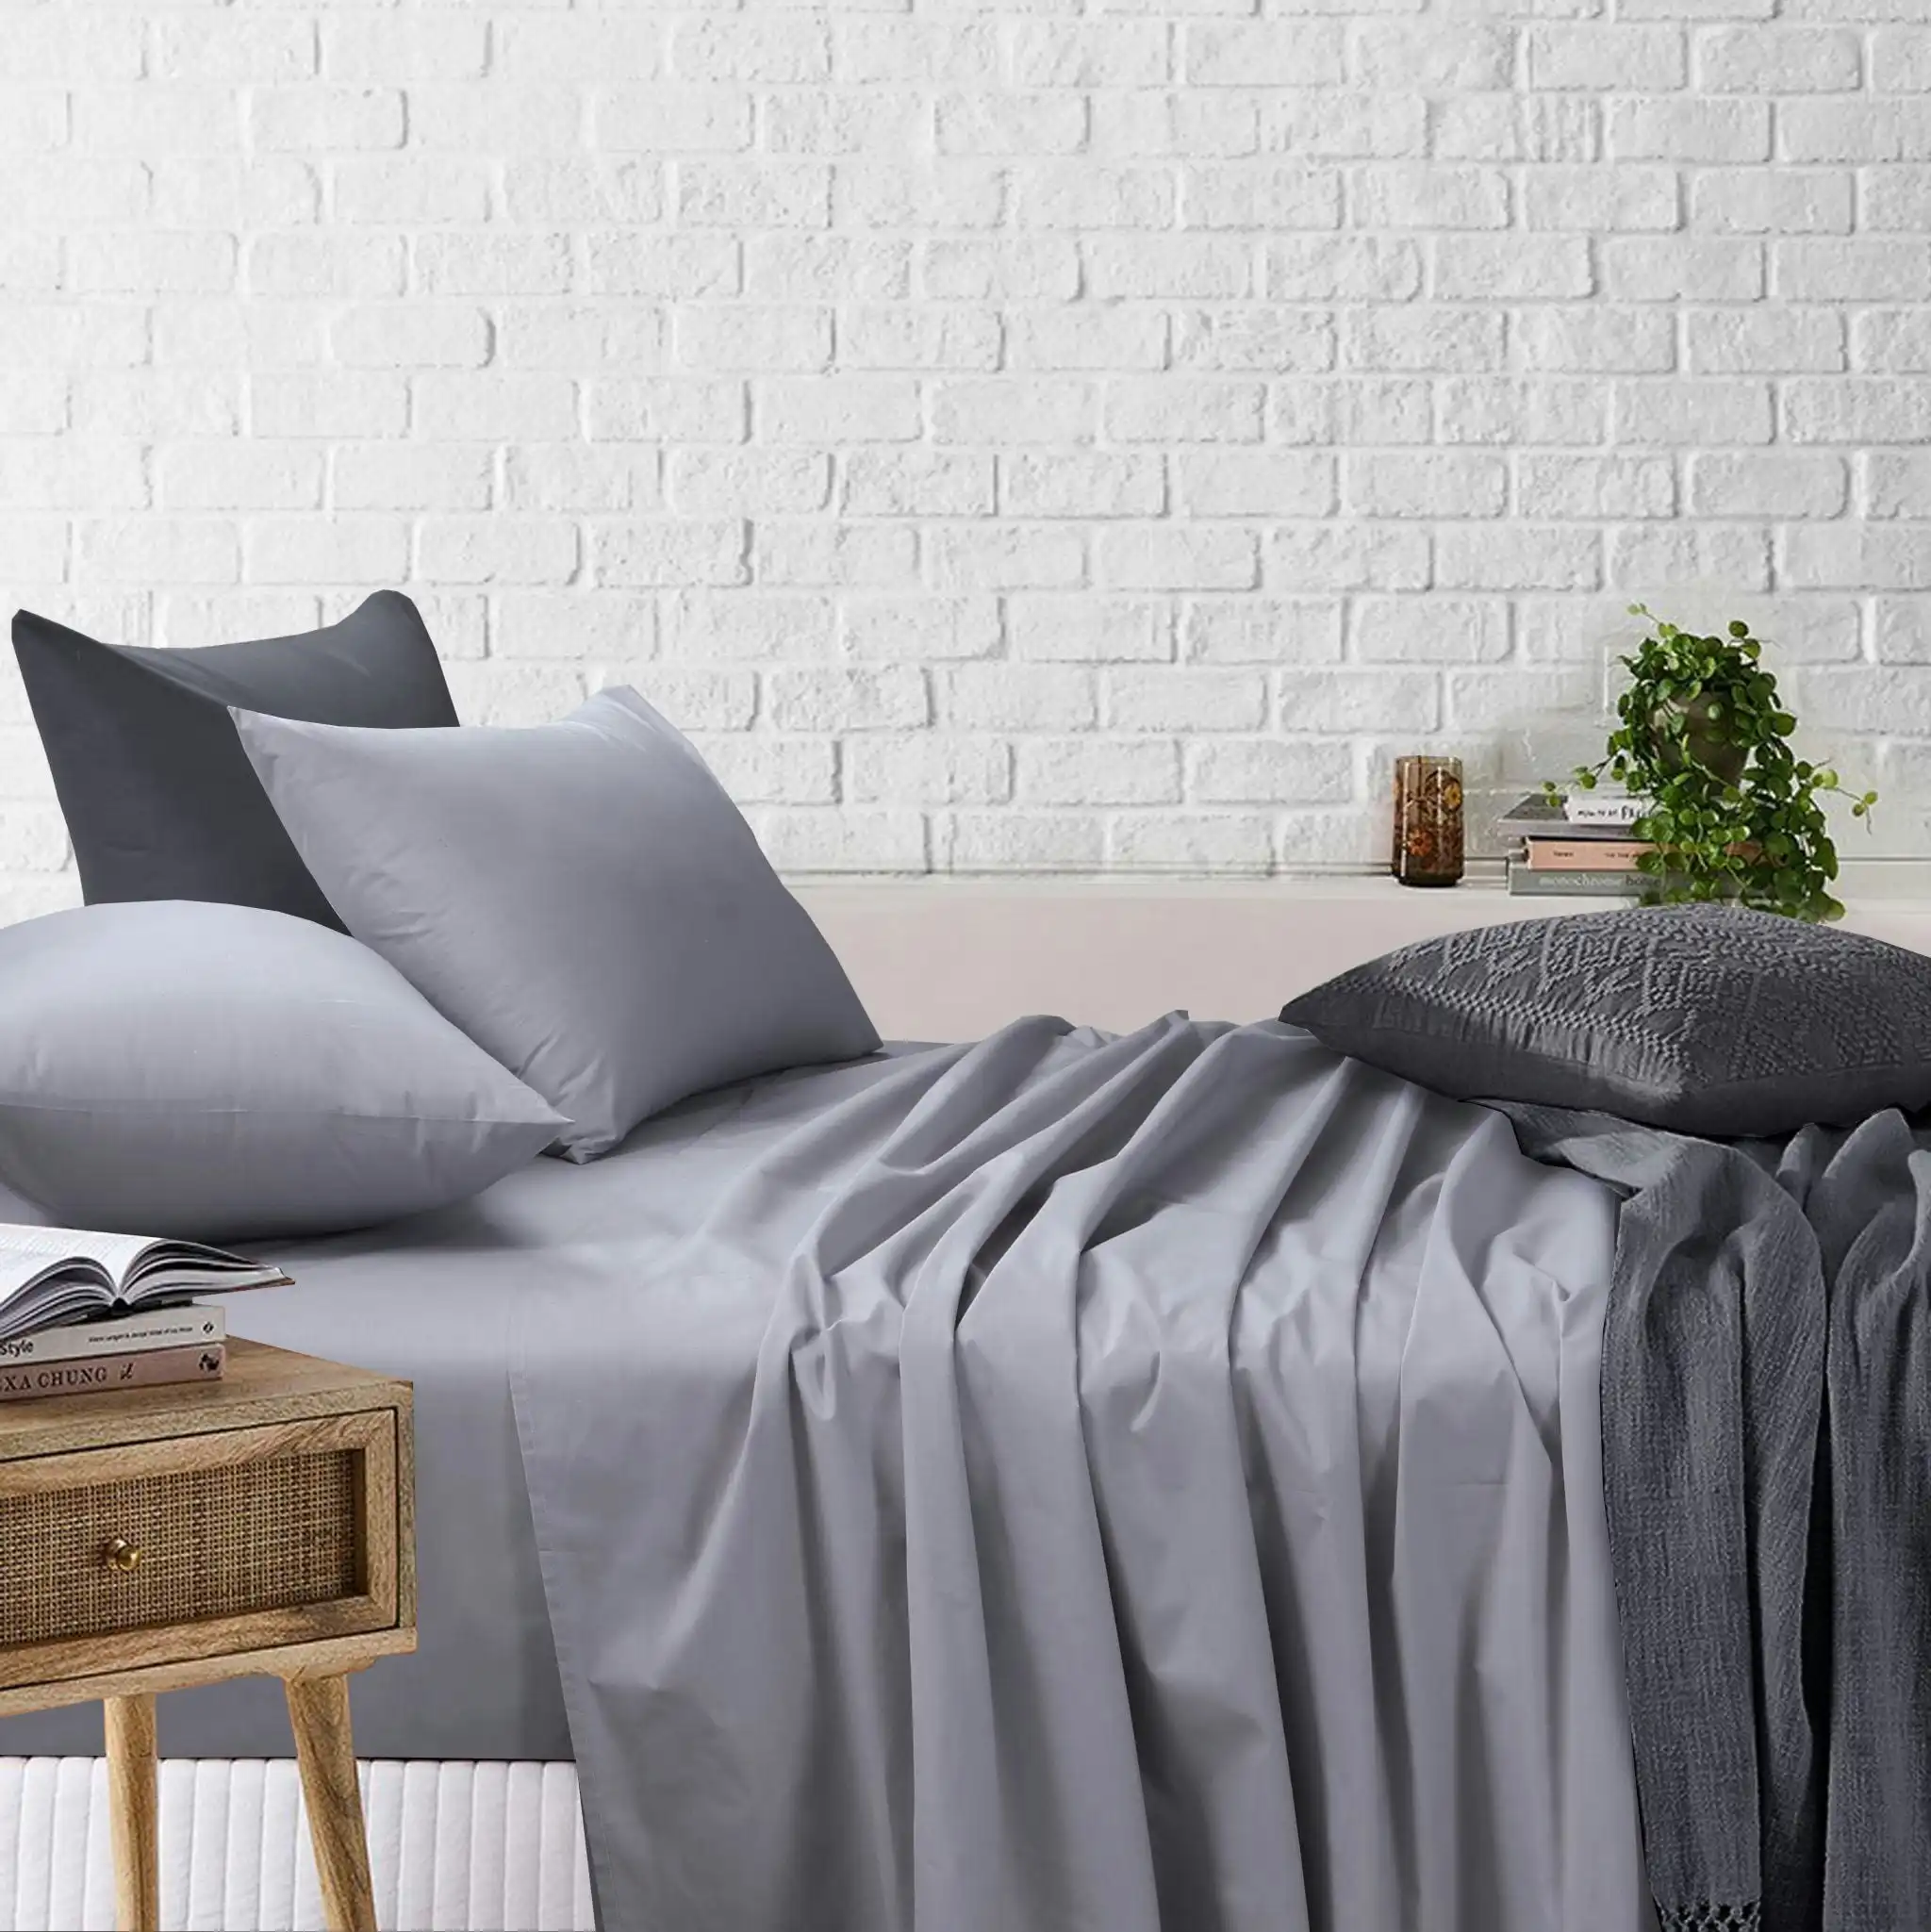 Amsons Light Grey Bedsheets Set- Flat & Fitted Sheets With Pillowcases